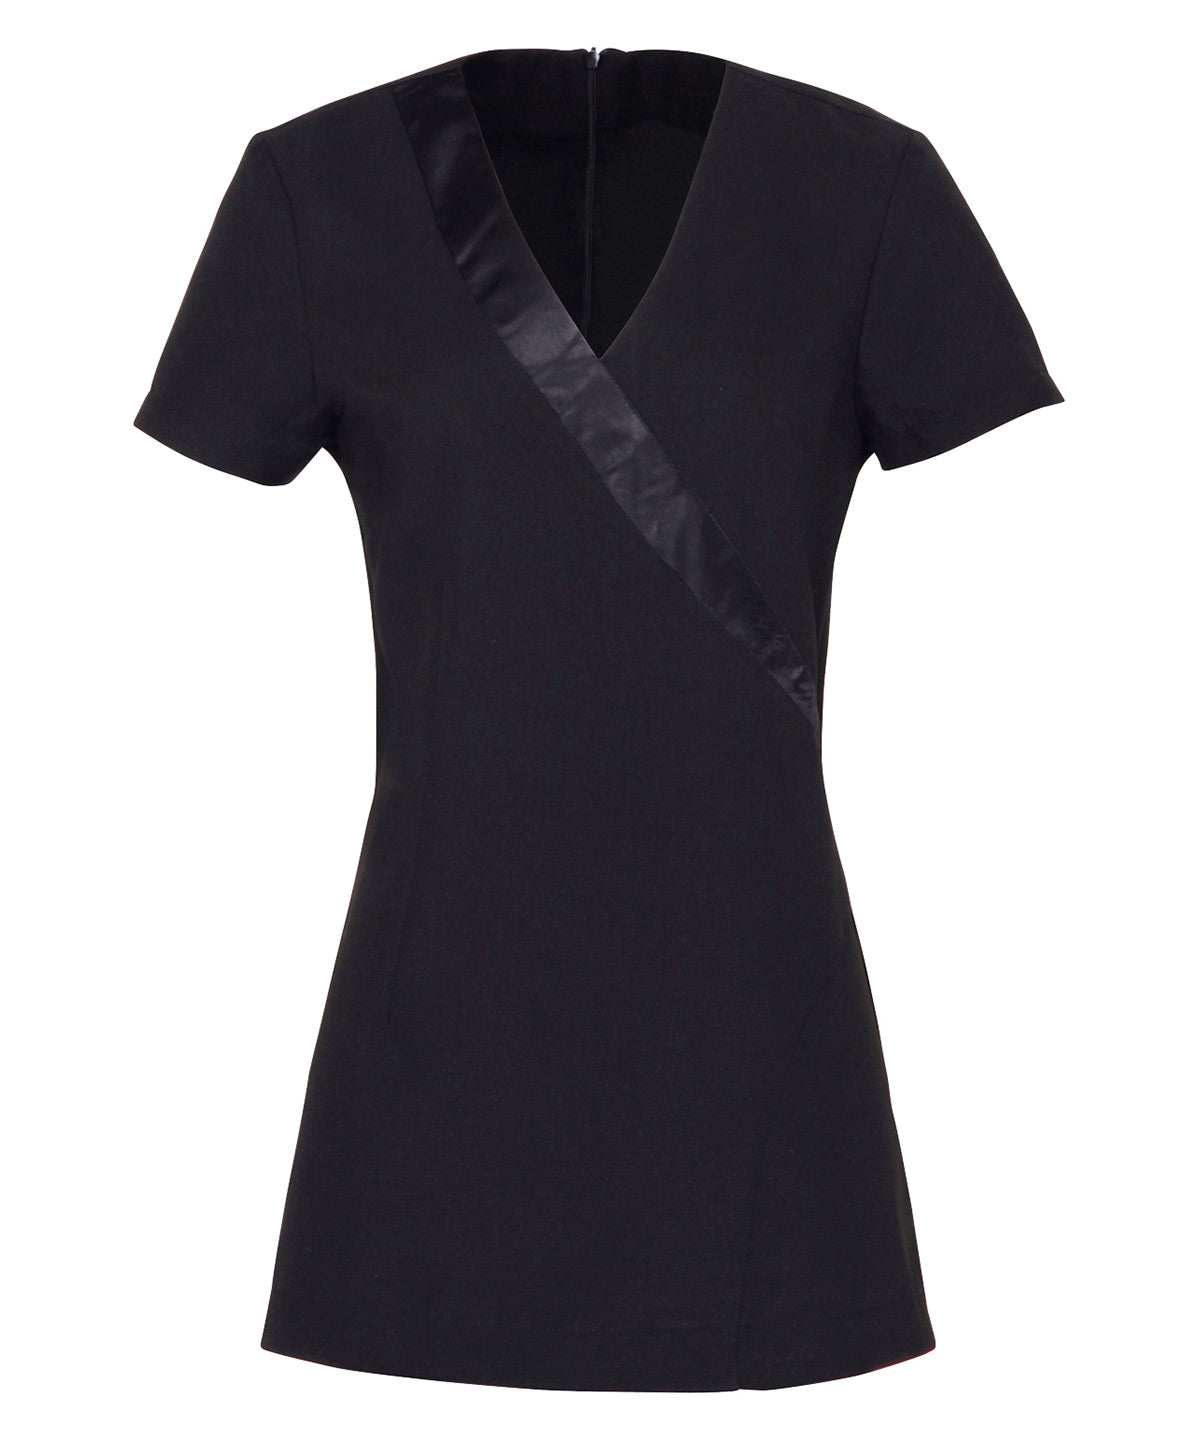 Premier Rose beauty and spa tunic